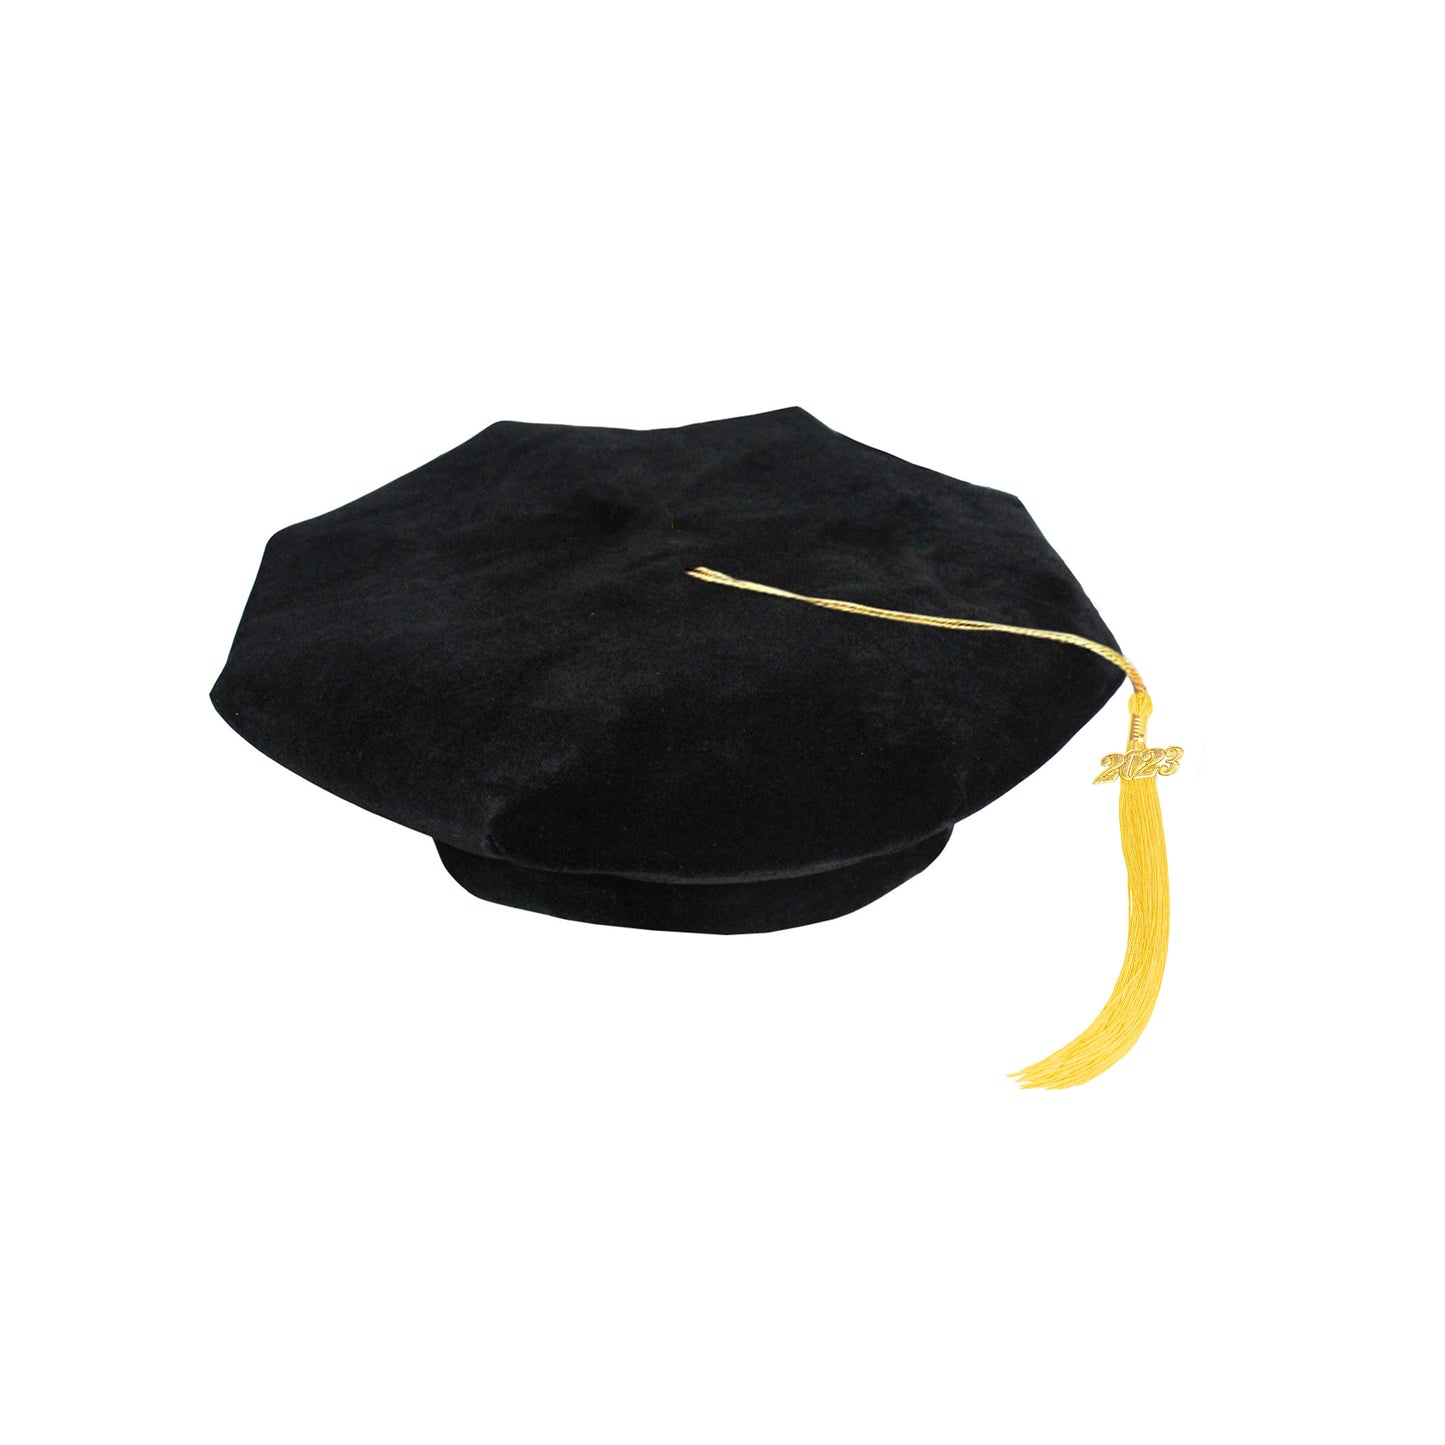 Deluxe Doctoral Graduation Tam with tassels in Various Colors and Styles (4/6/8 Sided)-CA graduation